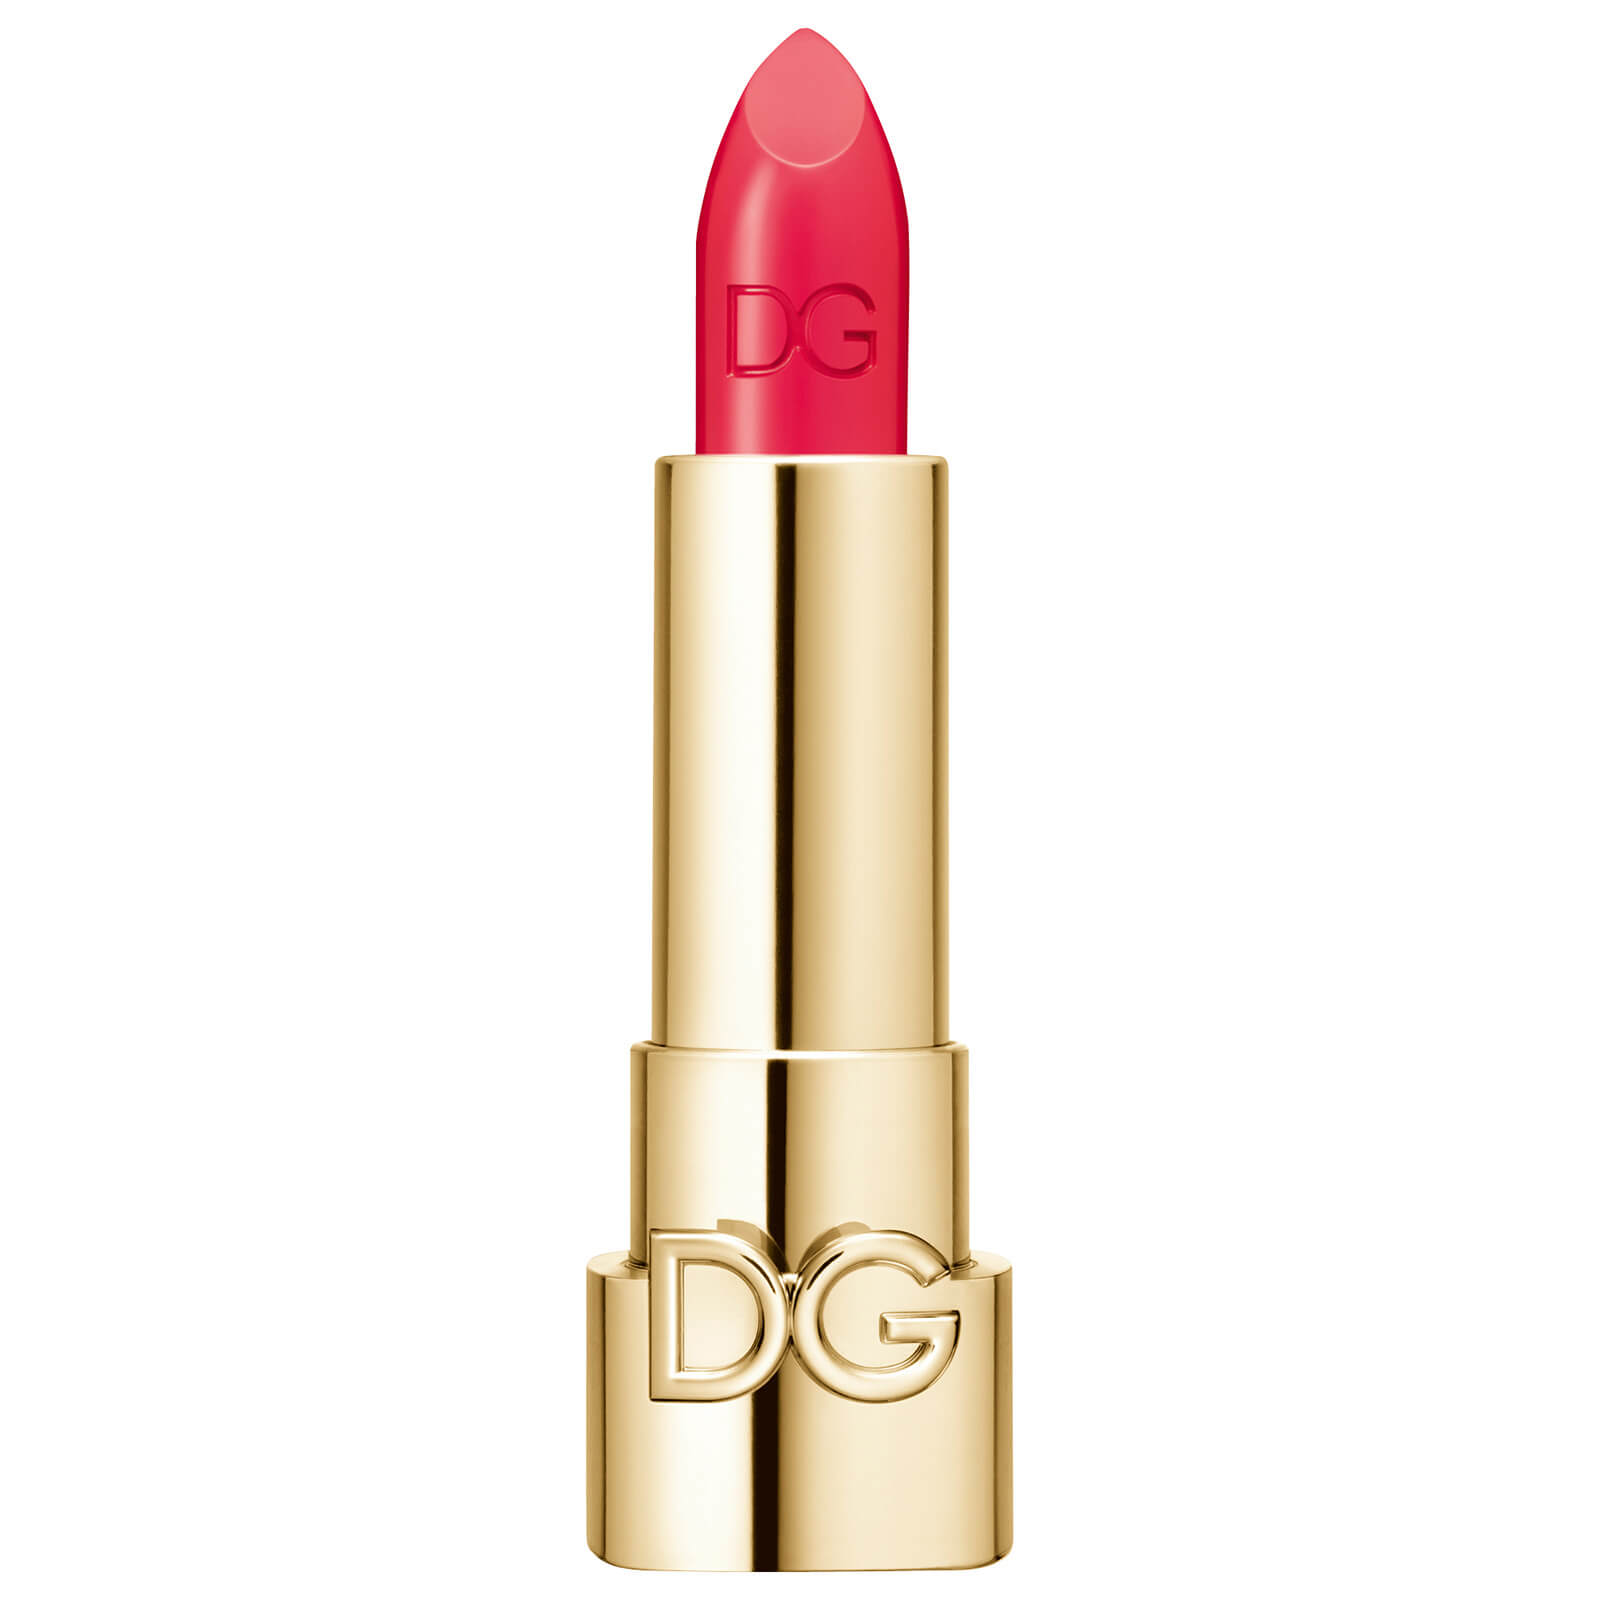 Dolce&Gabbana The Only One Lipstick 1.7g (No Cap) (Various Shades) - 410 Pop Watermelon